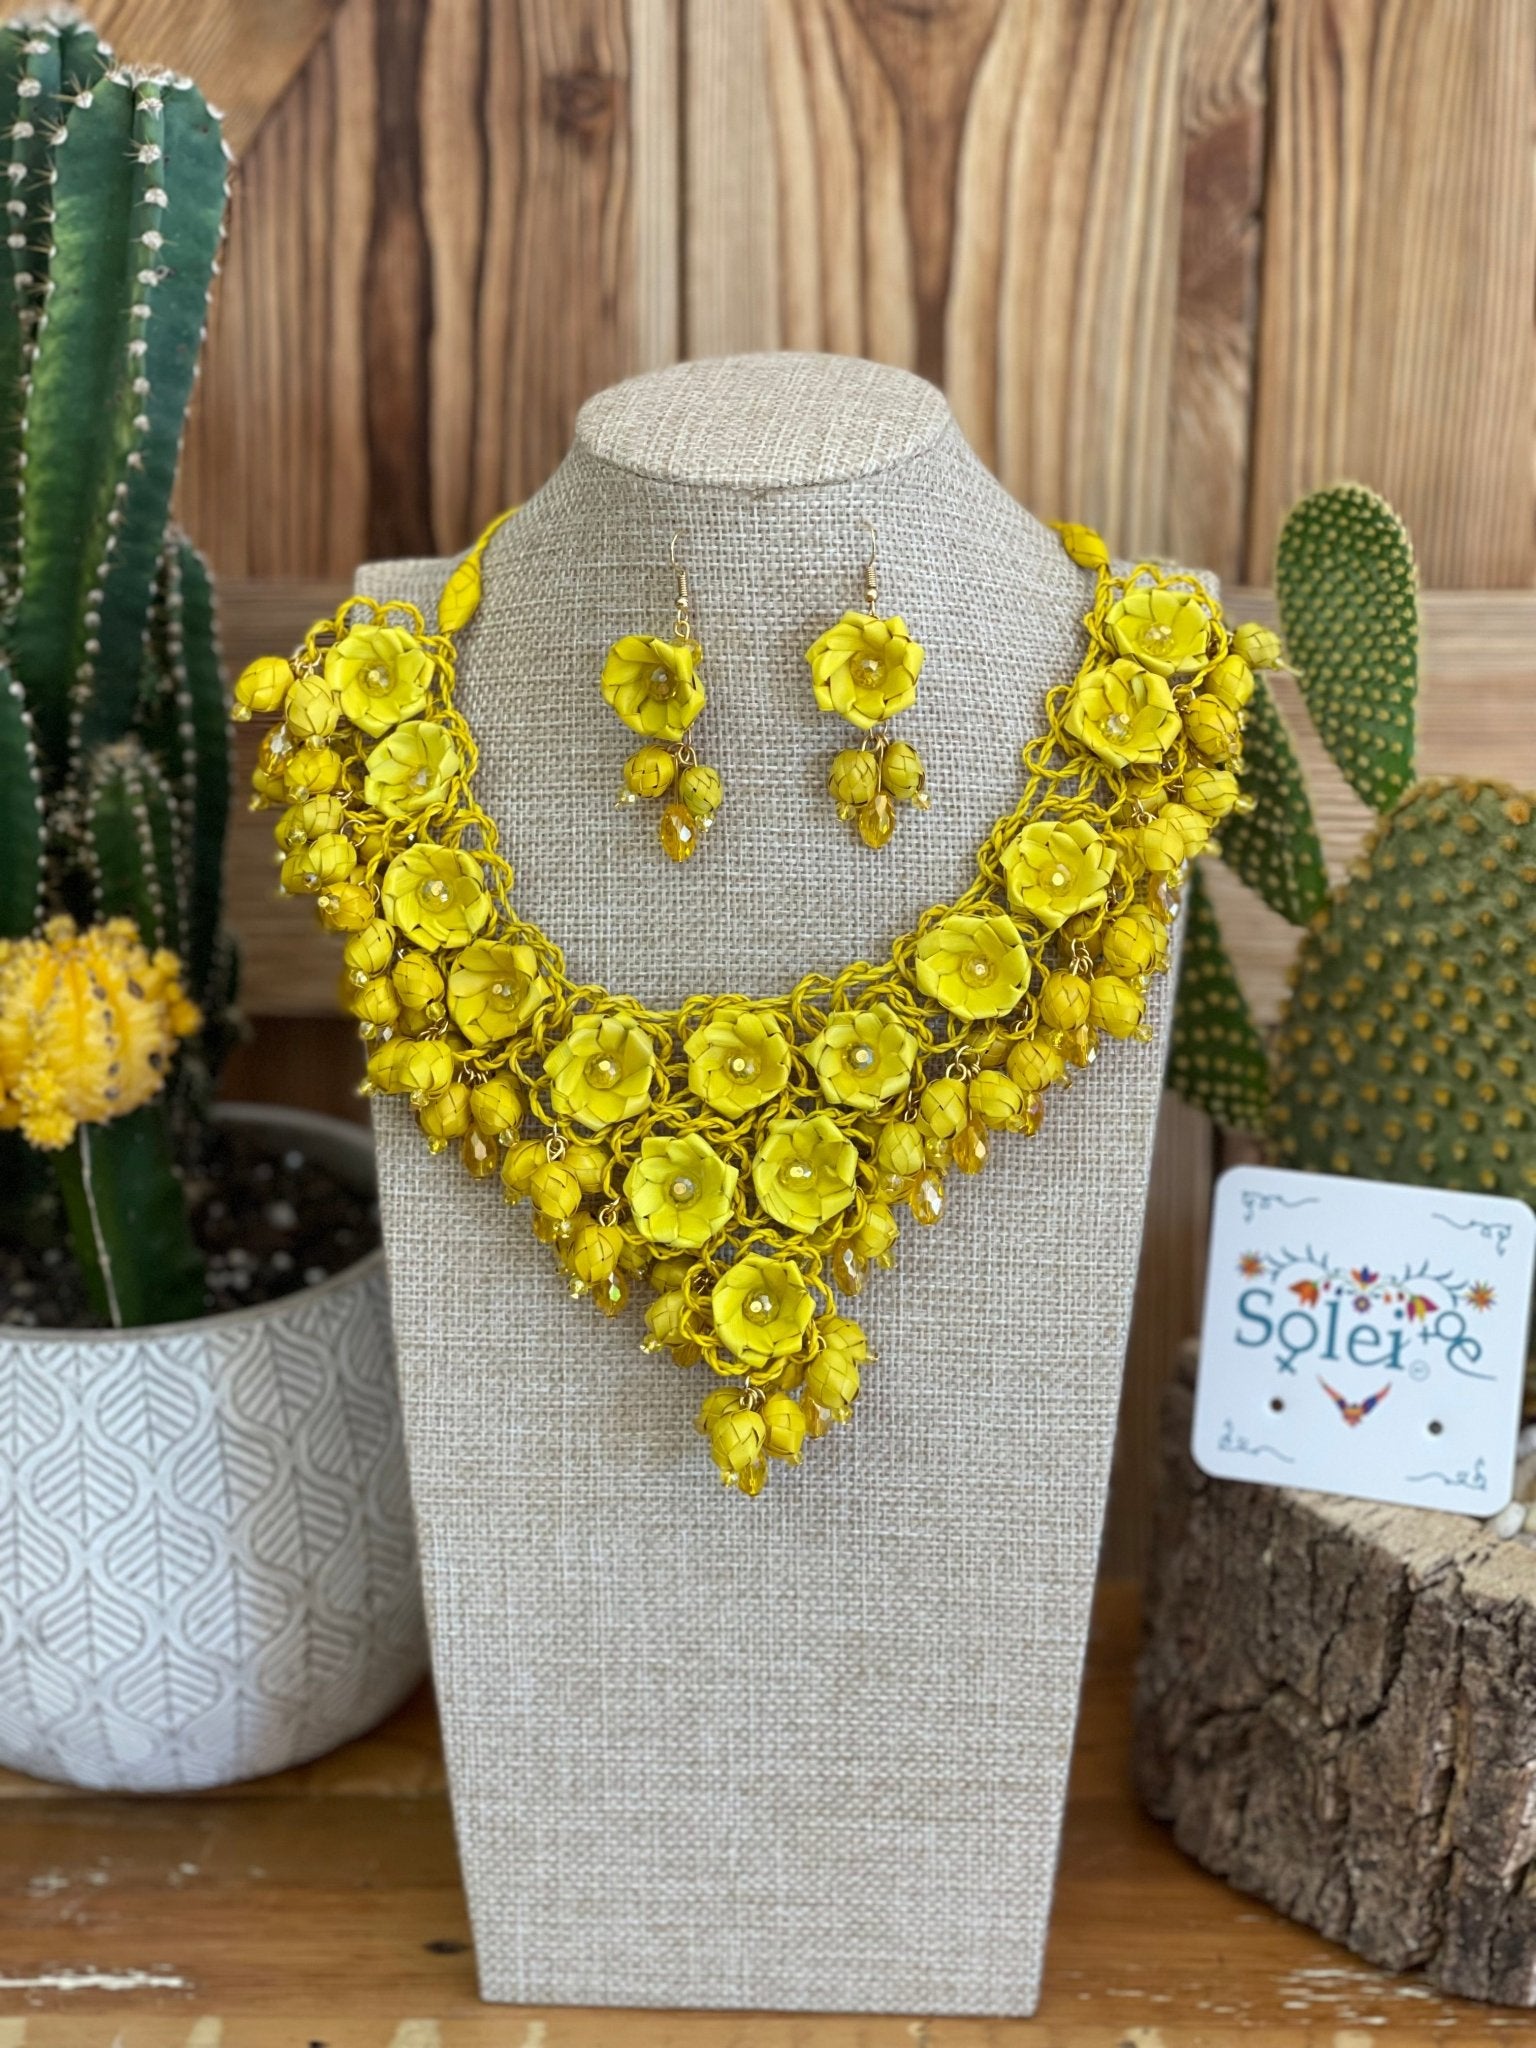 Mexican Jewerly Set. Palm Leaf Flower Necklace and Earrings. Collar de Palma Corto - Solei Store